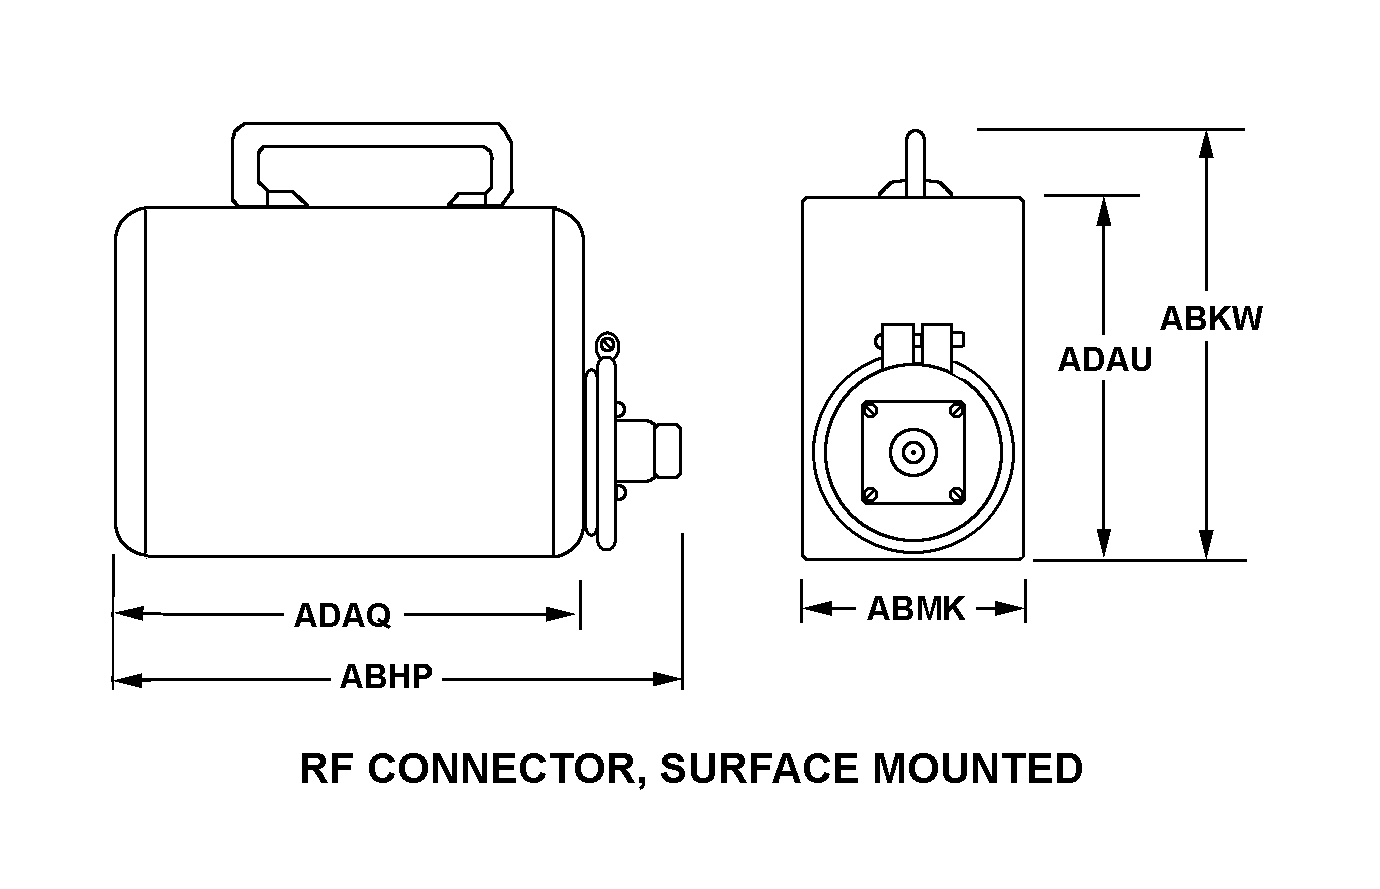 RF CONNECTOR, SURFACE MOUNTED style nsn 5985-00-194-9751